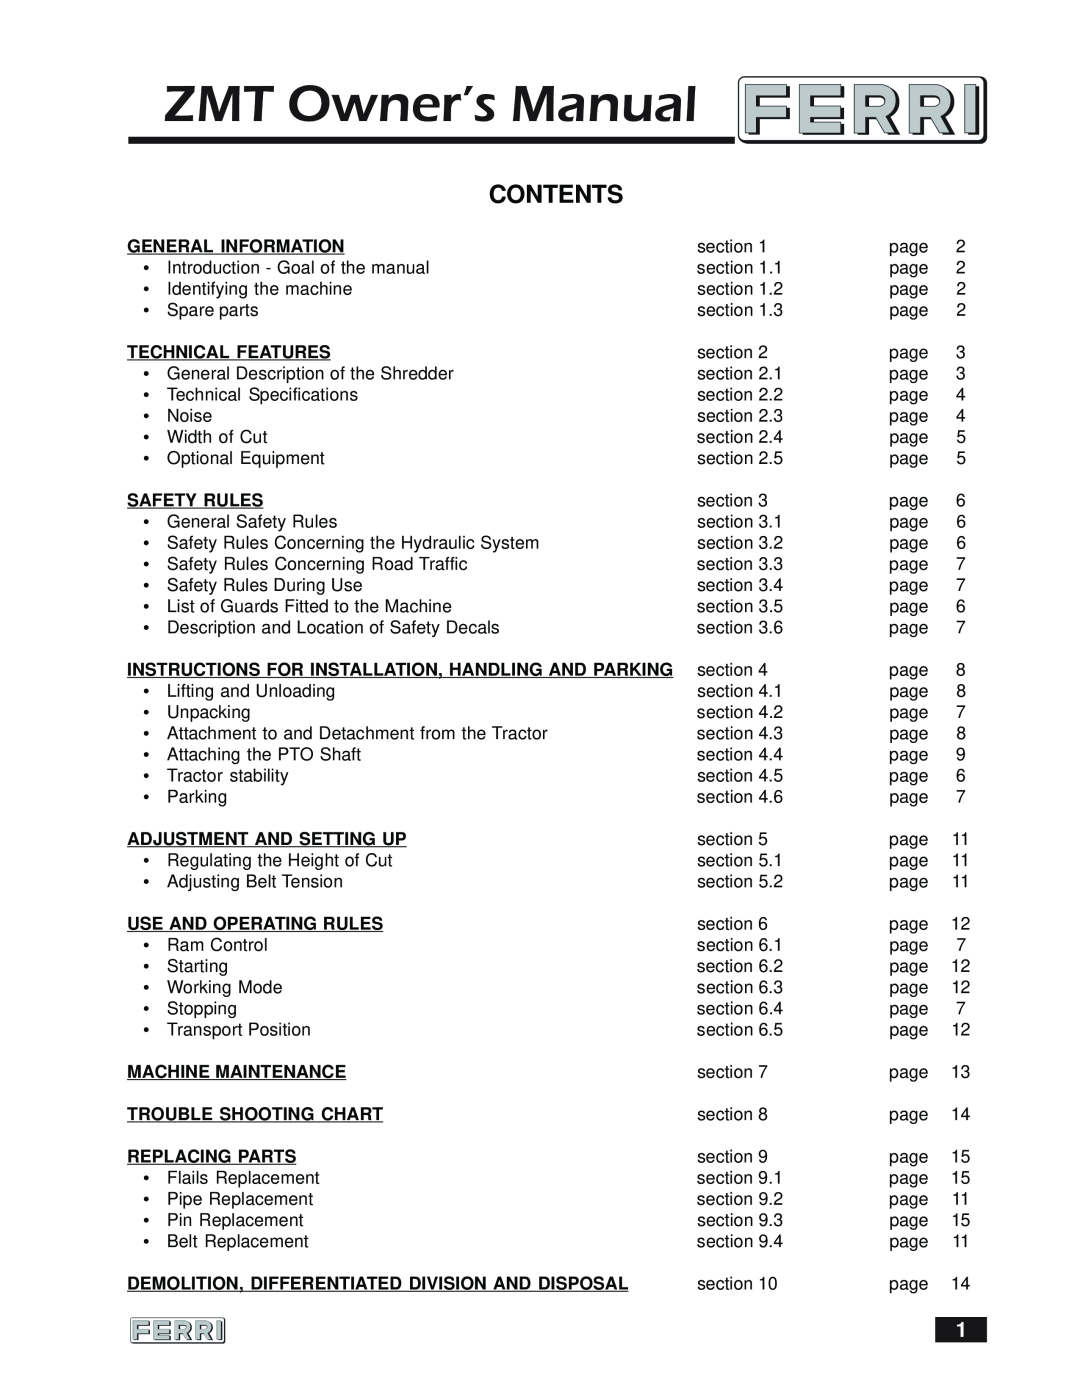 Ferris Industries 160 owner manual Contents 